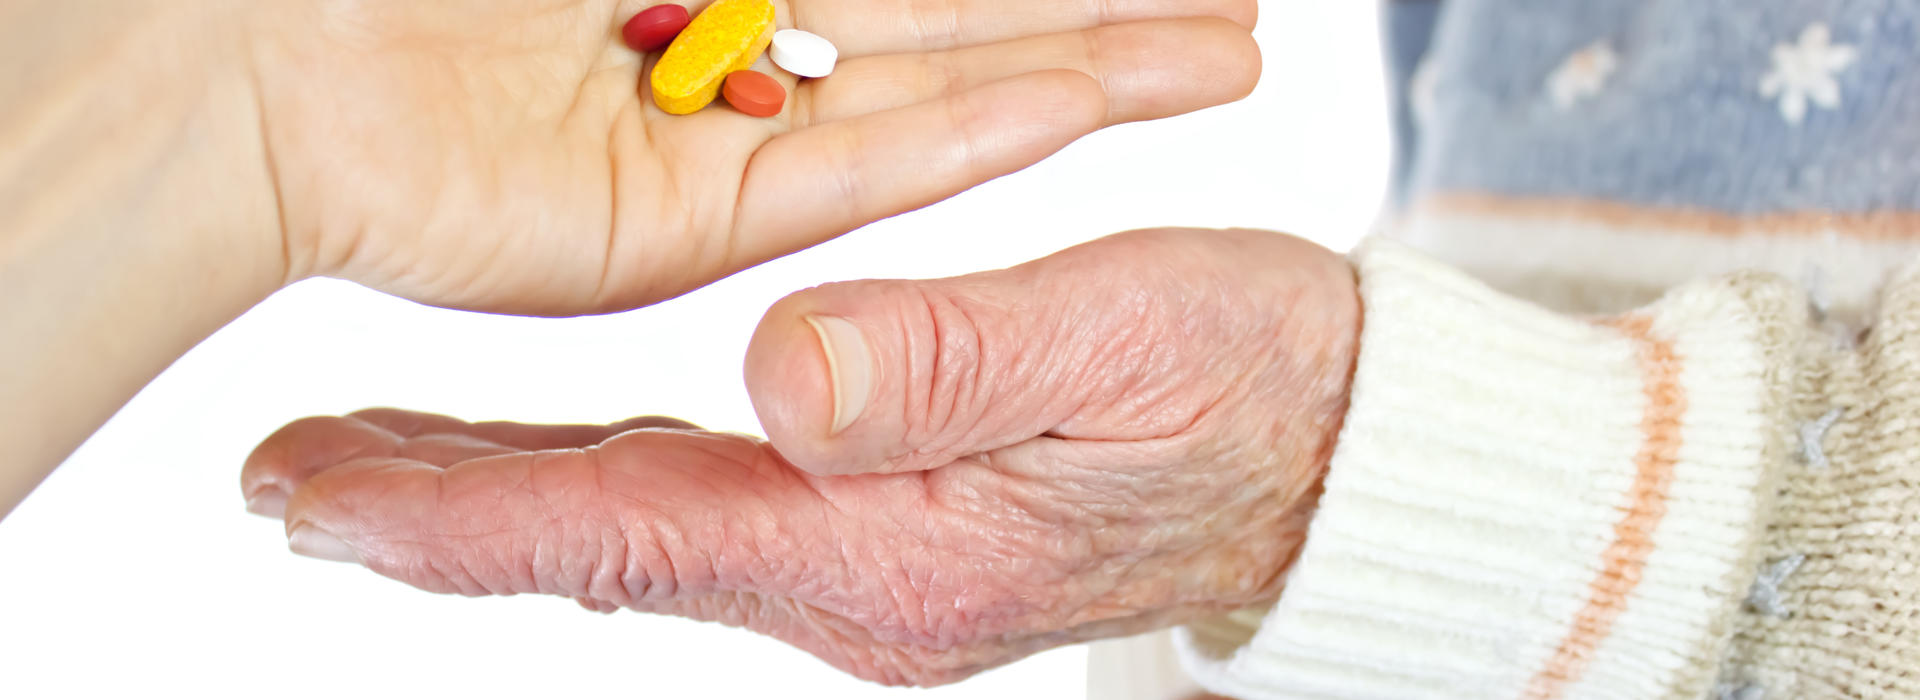 dietary supplements in hand